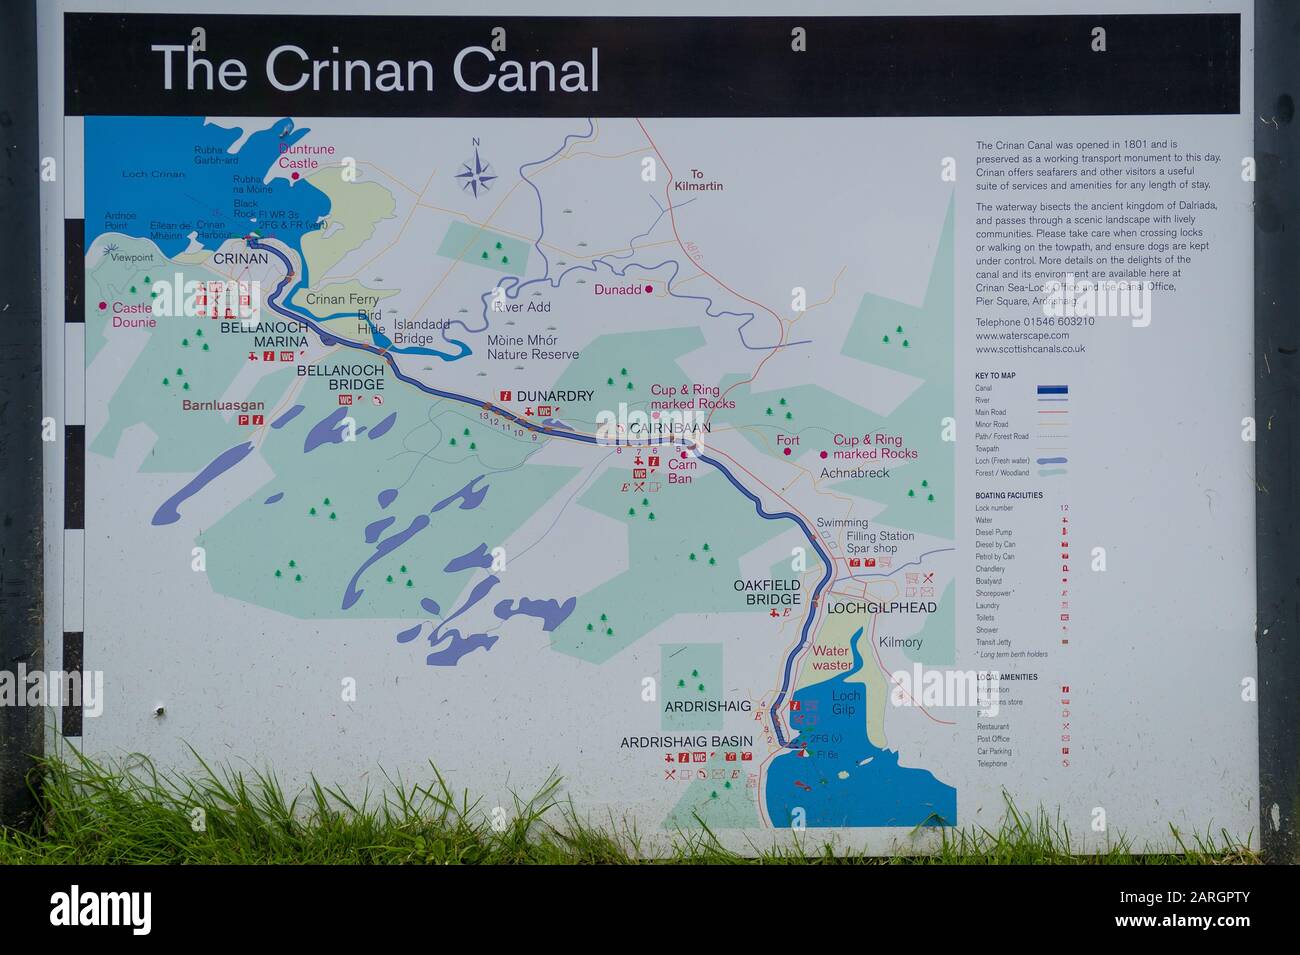 Crinan canal map. Touristic information board with water way and villages of the channel. Scotland. Stock Photo